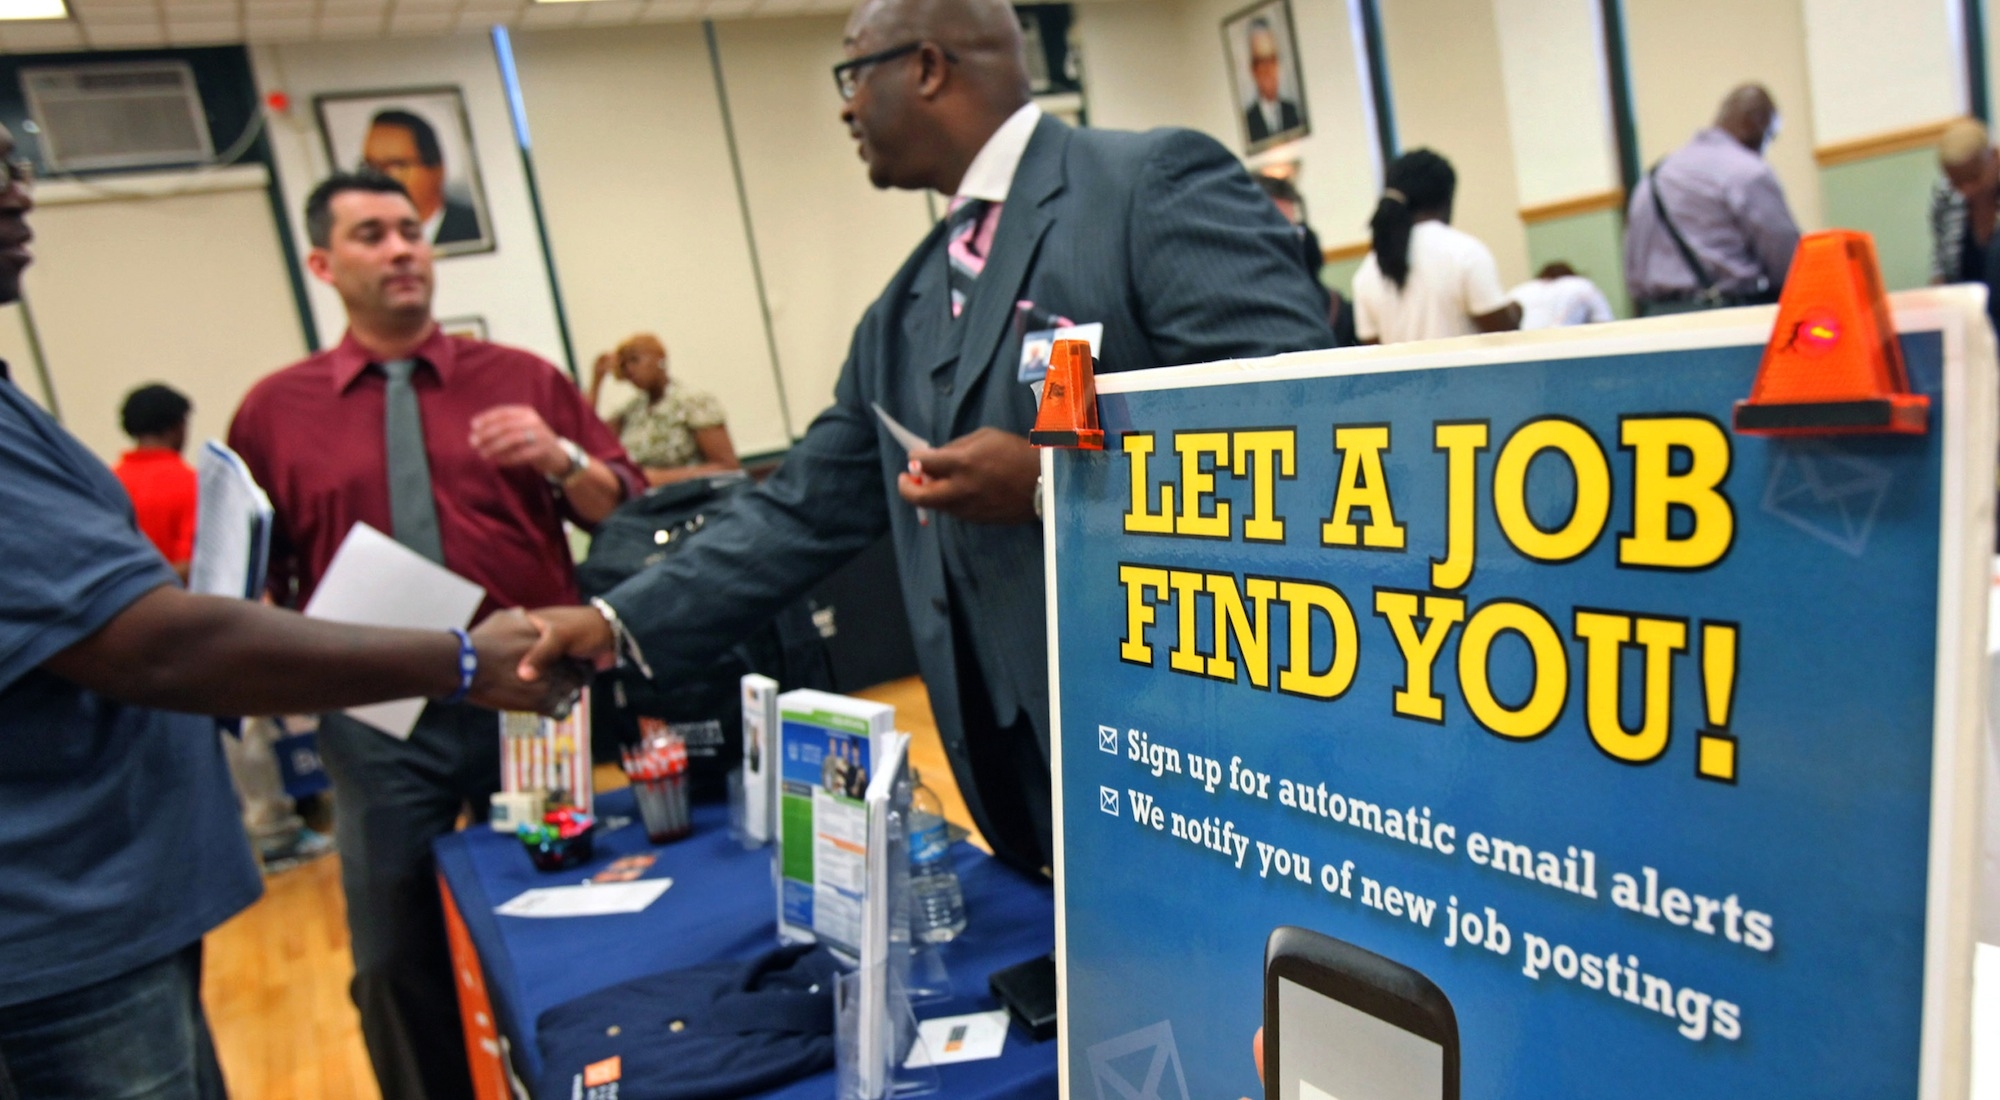 U.S. unemployment falls to 4.9% before election